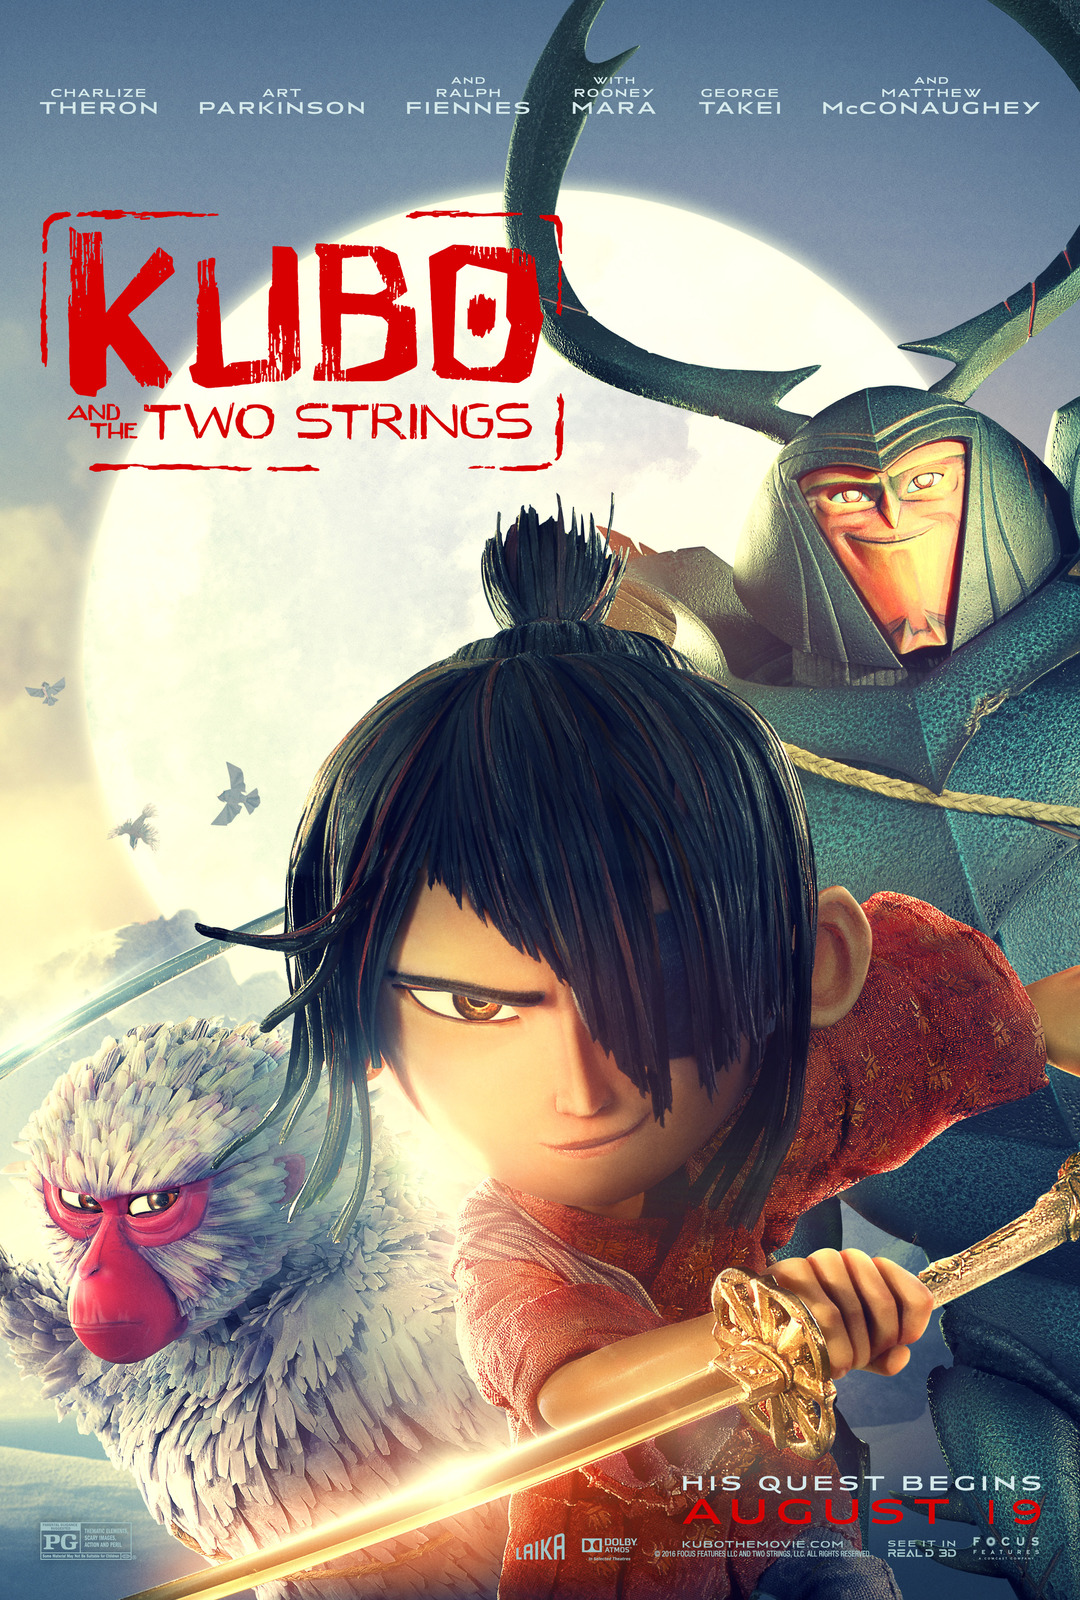 Kubo and the Two Strings Movie Poser